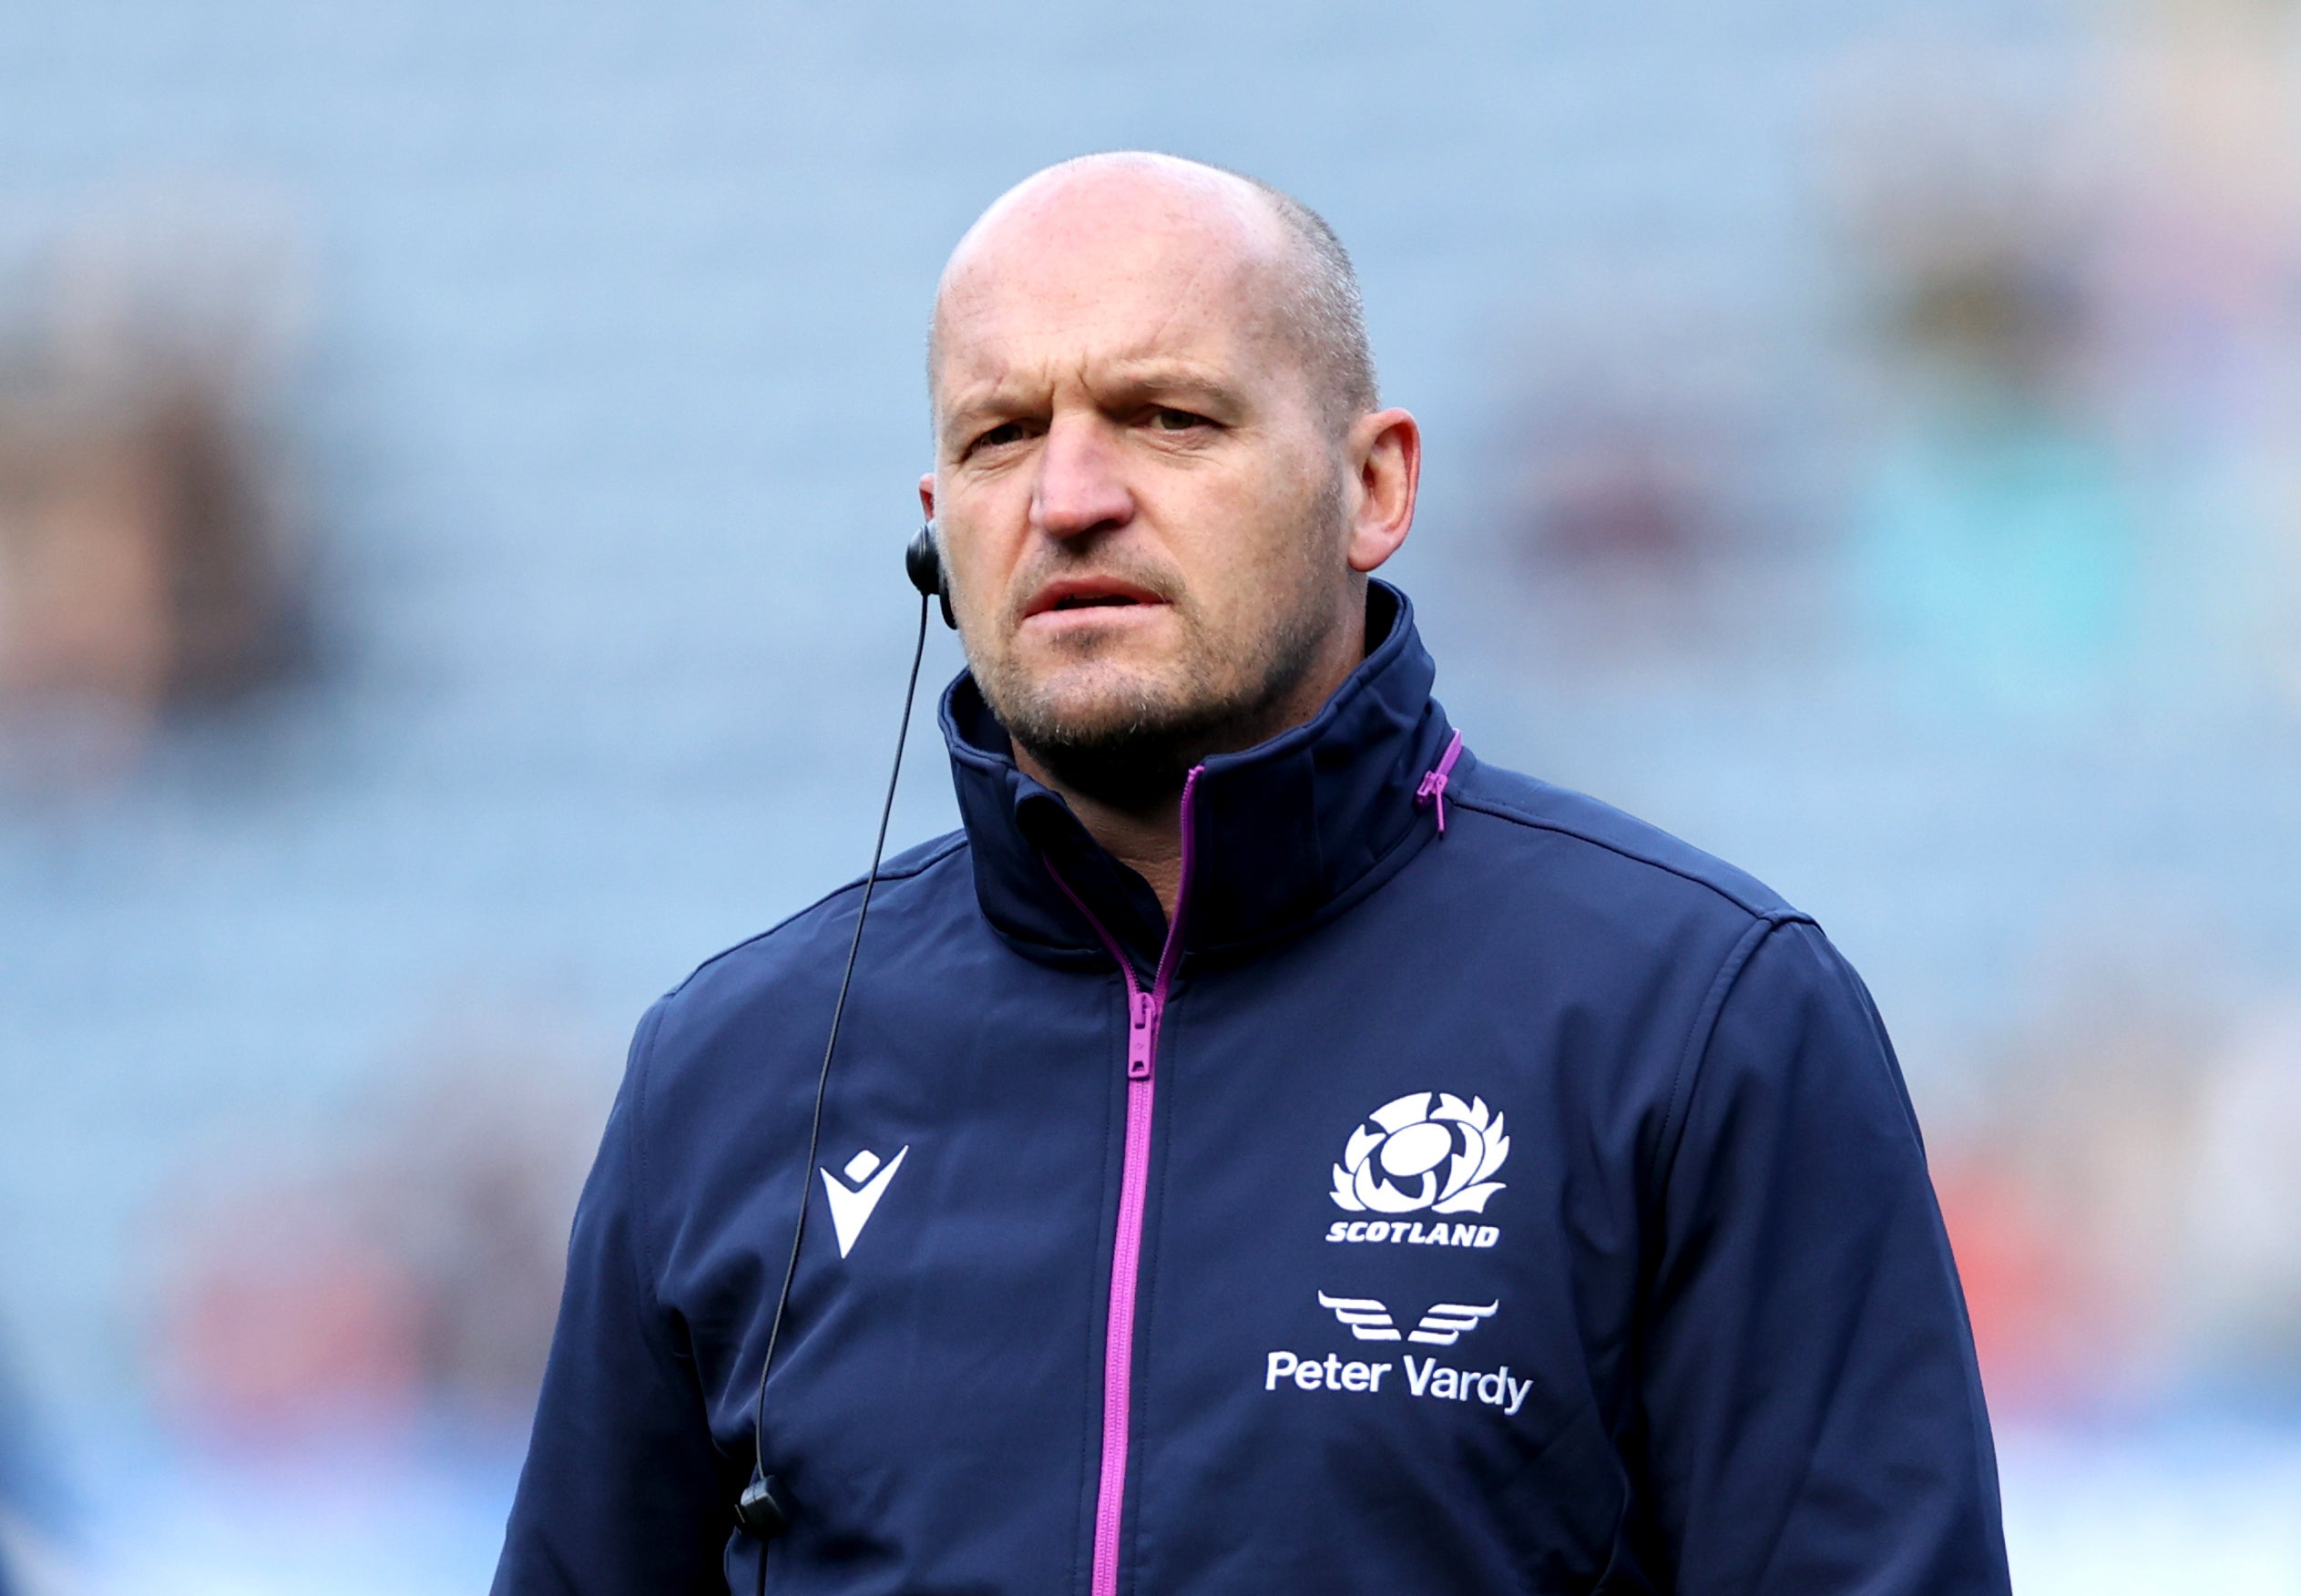 Gregor Townsend will be hoping to learn more about his team ahead of the Six Nations. (Steve Welsh/PA)